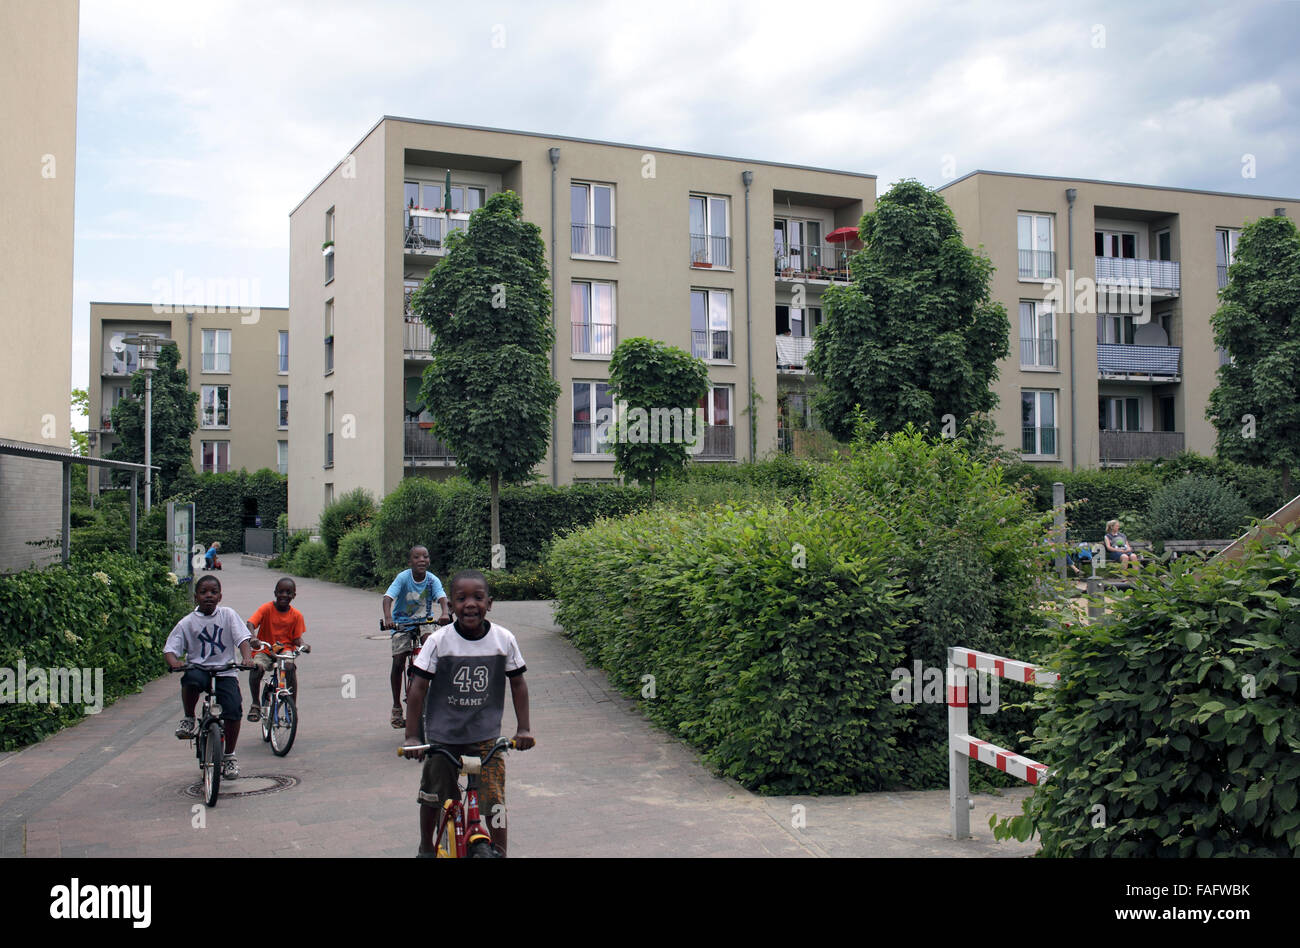 A pedestrian and bike route within the car-free settlement of Gartensiedlung Weissenburg, Muenster, Germany. Stock Photo